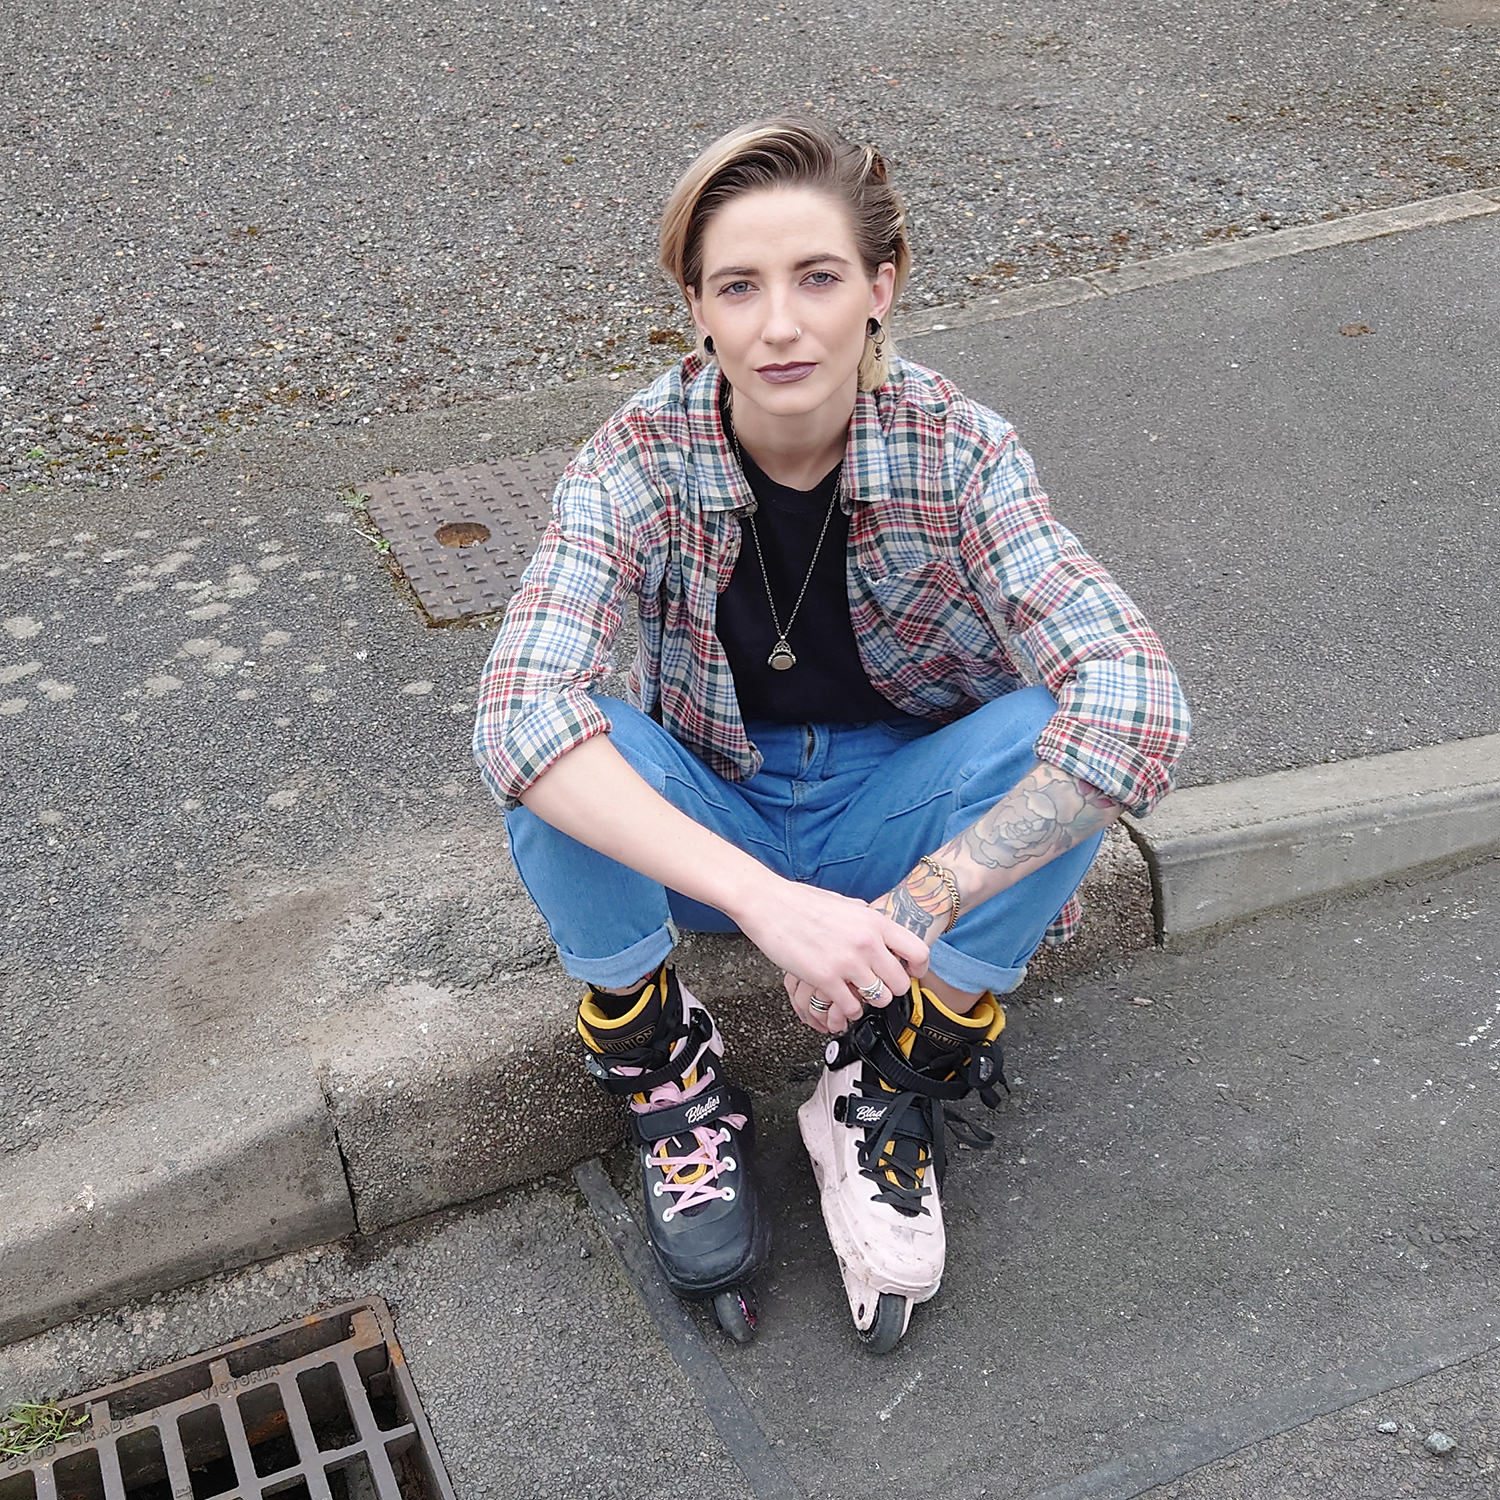 WOMEN ON WHEELS: 24 VOICES FROM INSIDE ROLLERBLADING